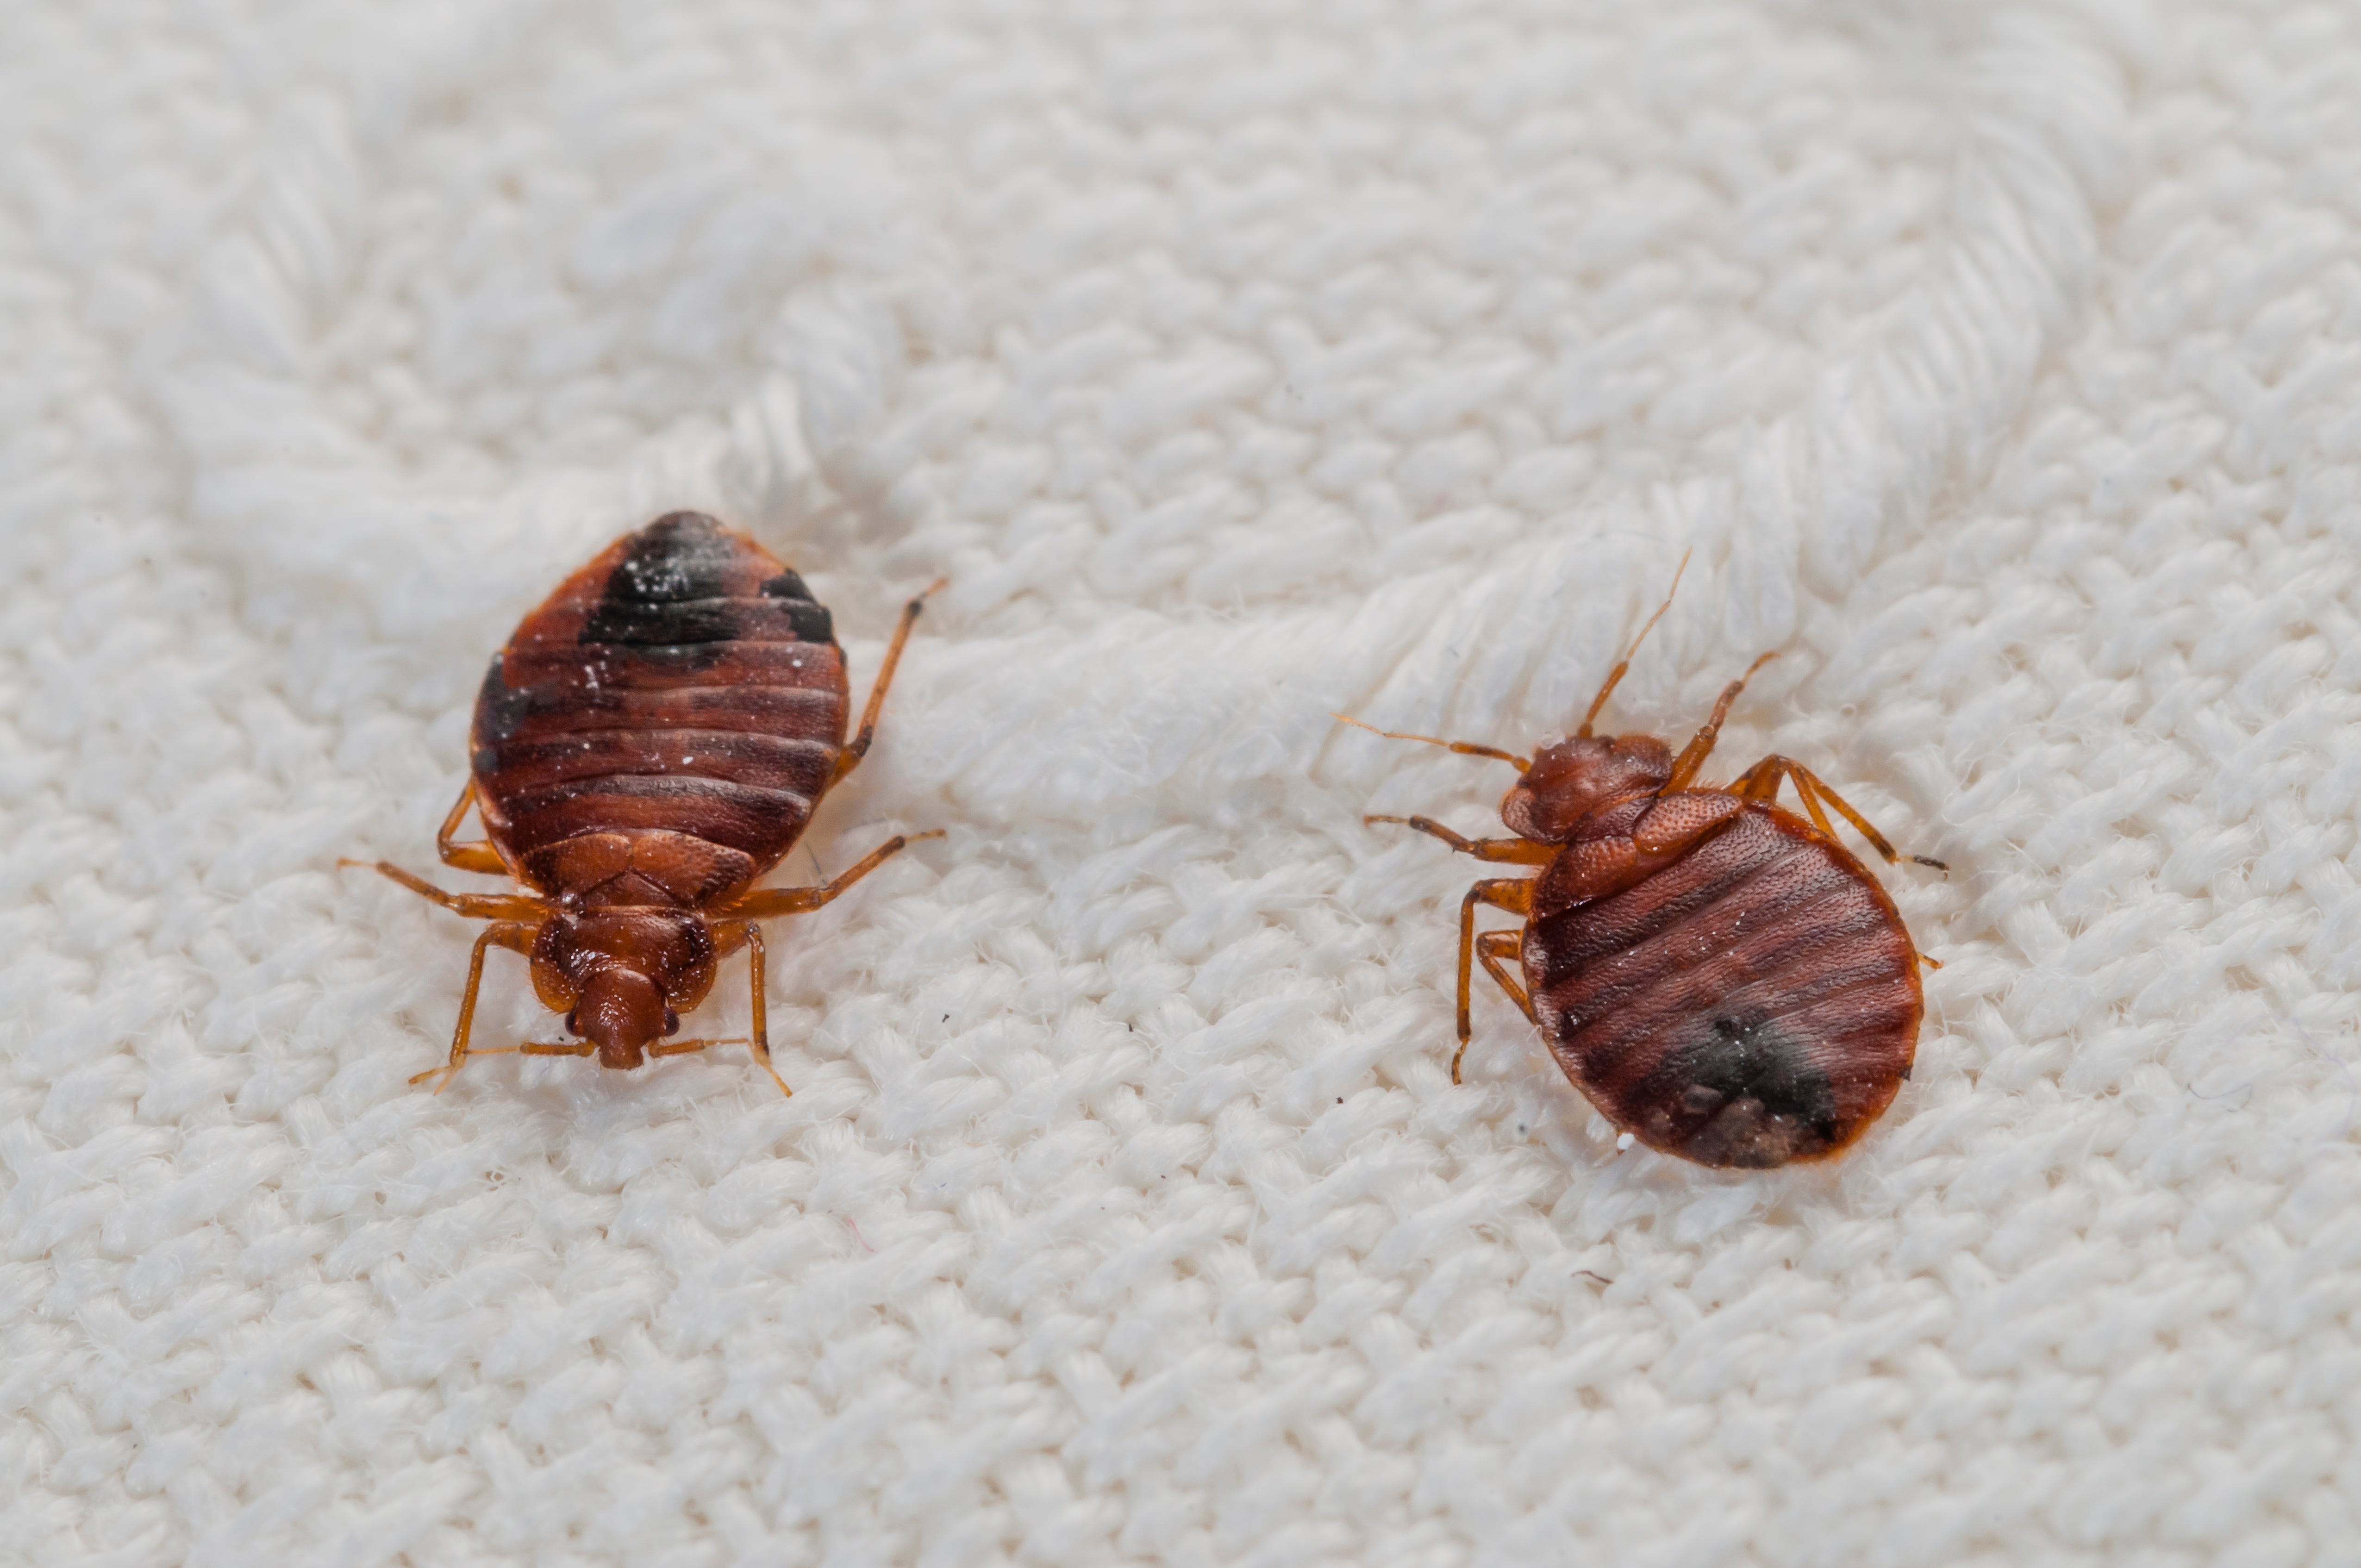 How Do Bed Bugs Survive?